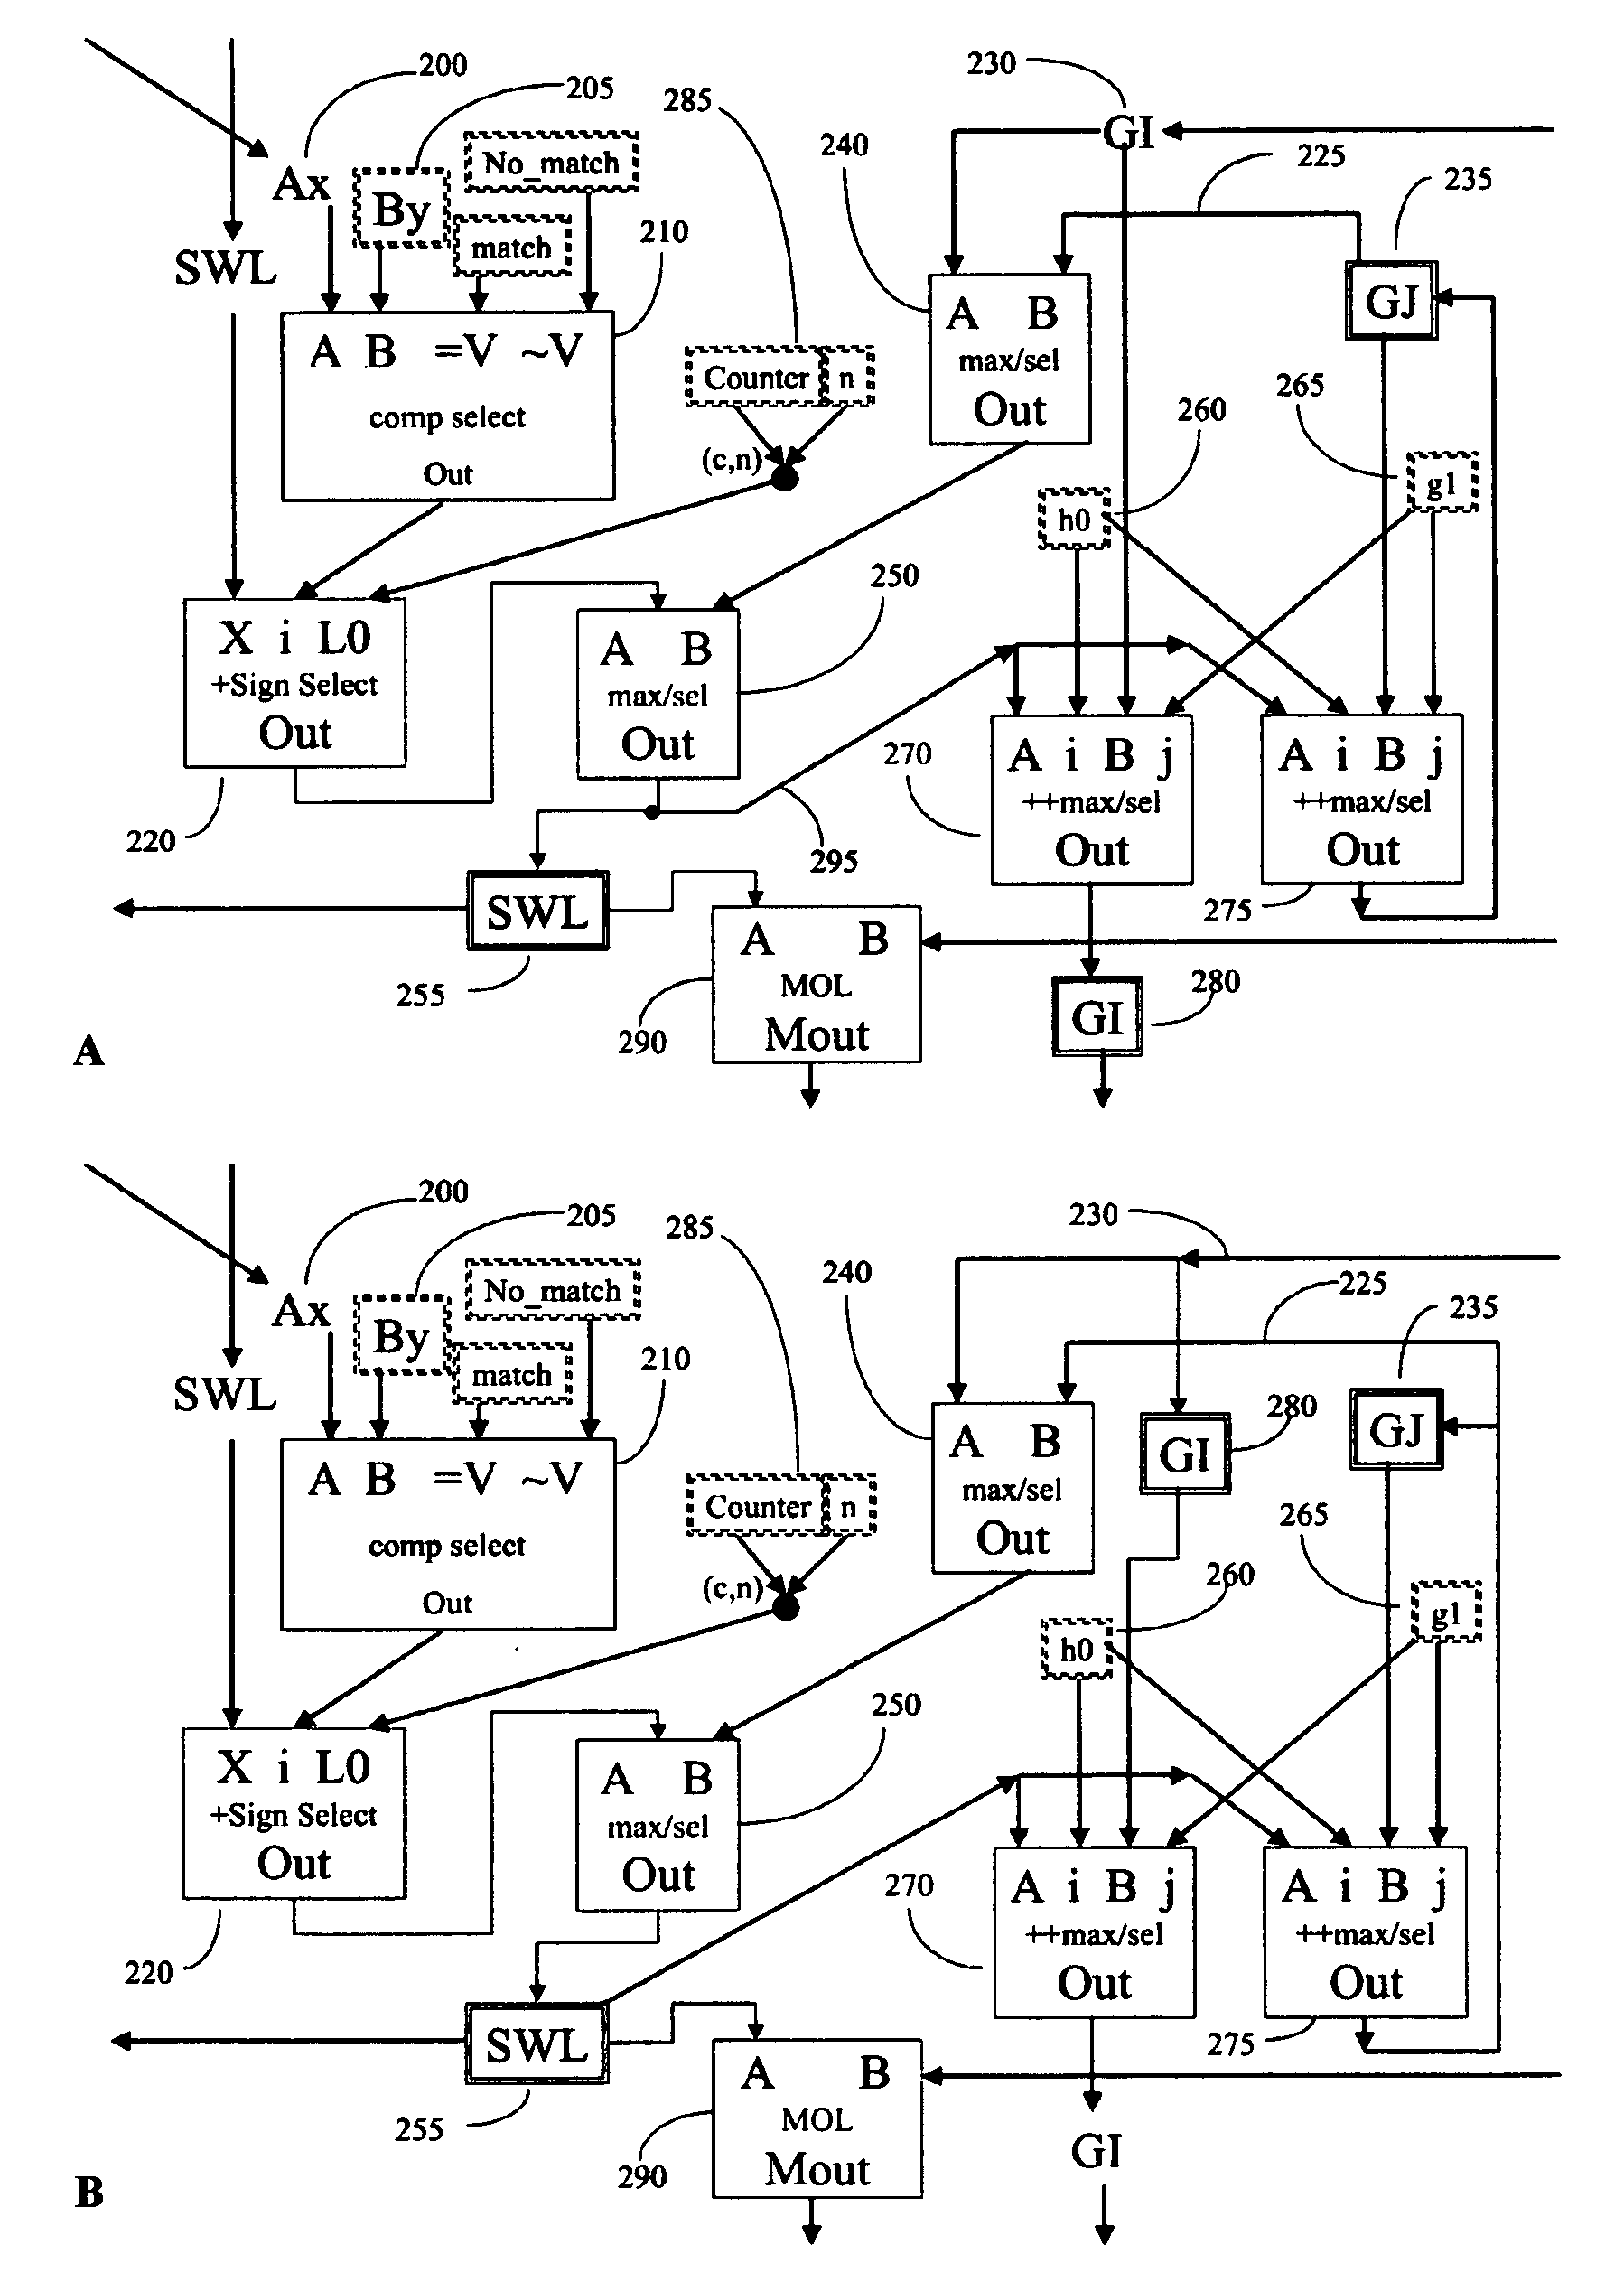 Processors for multi-dimensional sequence comparisons